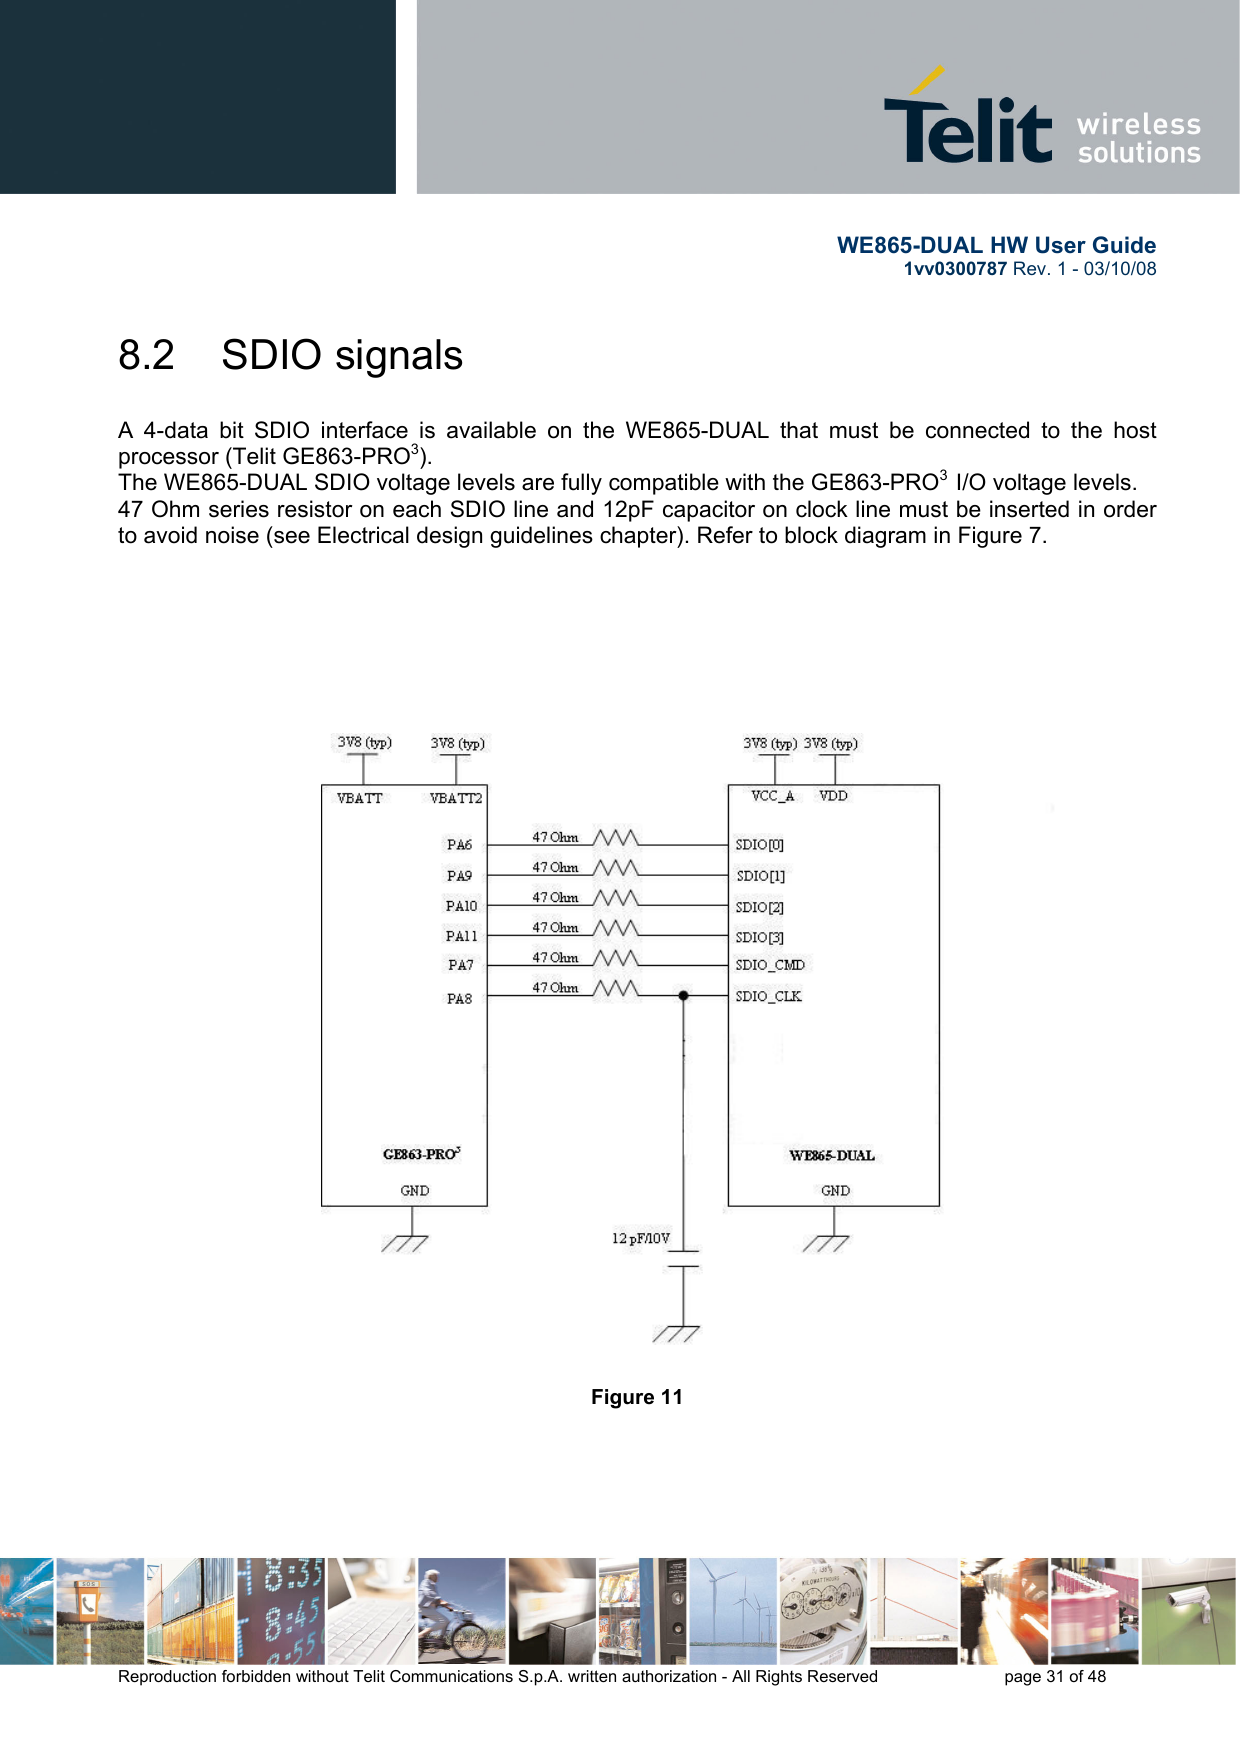       WE865-DUAL HW User Guide 1vv0300787 Rev. 1 - 03/10/08      Reproduction forbidden without Telit Communications S.p.A. written authorization - All Rights Reserved    page 31 of 48  8.2  SDIO signals  A 4-data bit SDIO interface is available on the WE865-DUAL that must be connected to the host processor (Telit GE863-PRO3).  The WE865-DUAL SDIO voltage levels are fully compatible with the GE863-PRO3  I/O voltage levels.  47 Ohm series resistor on each SDIO line and 12pF capacitor on clock line must be inserted in order to avoid noise (see Electrical design guidelines chapter). Refer to block diagram in Figure 7.                                          Figure 11 